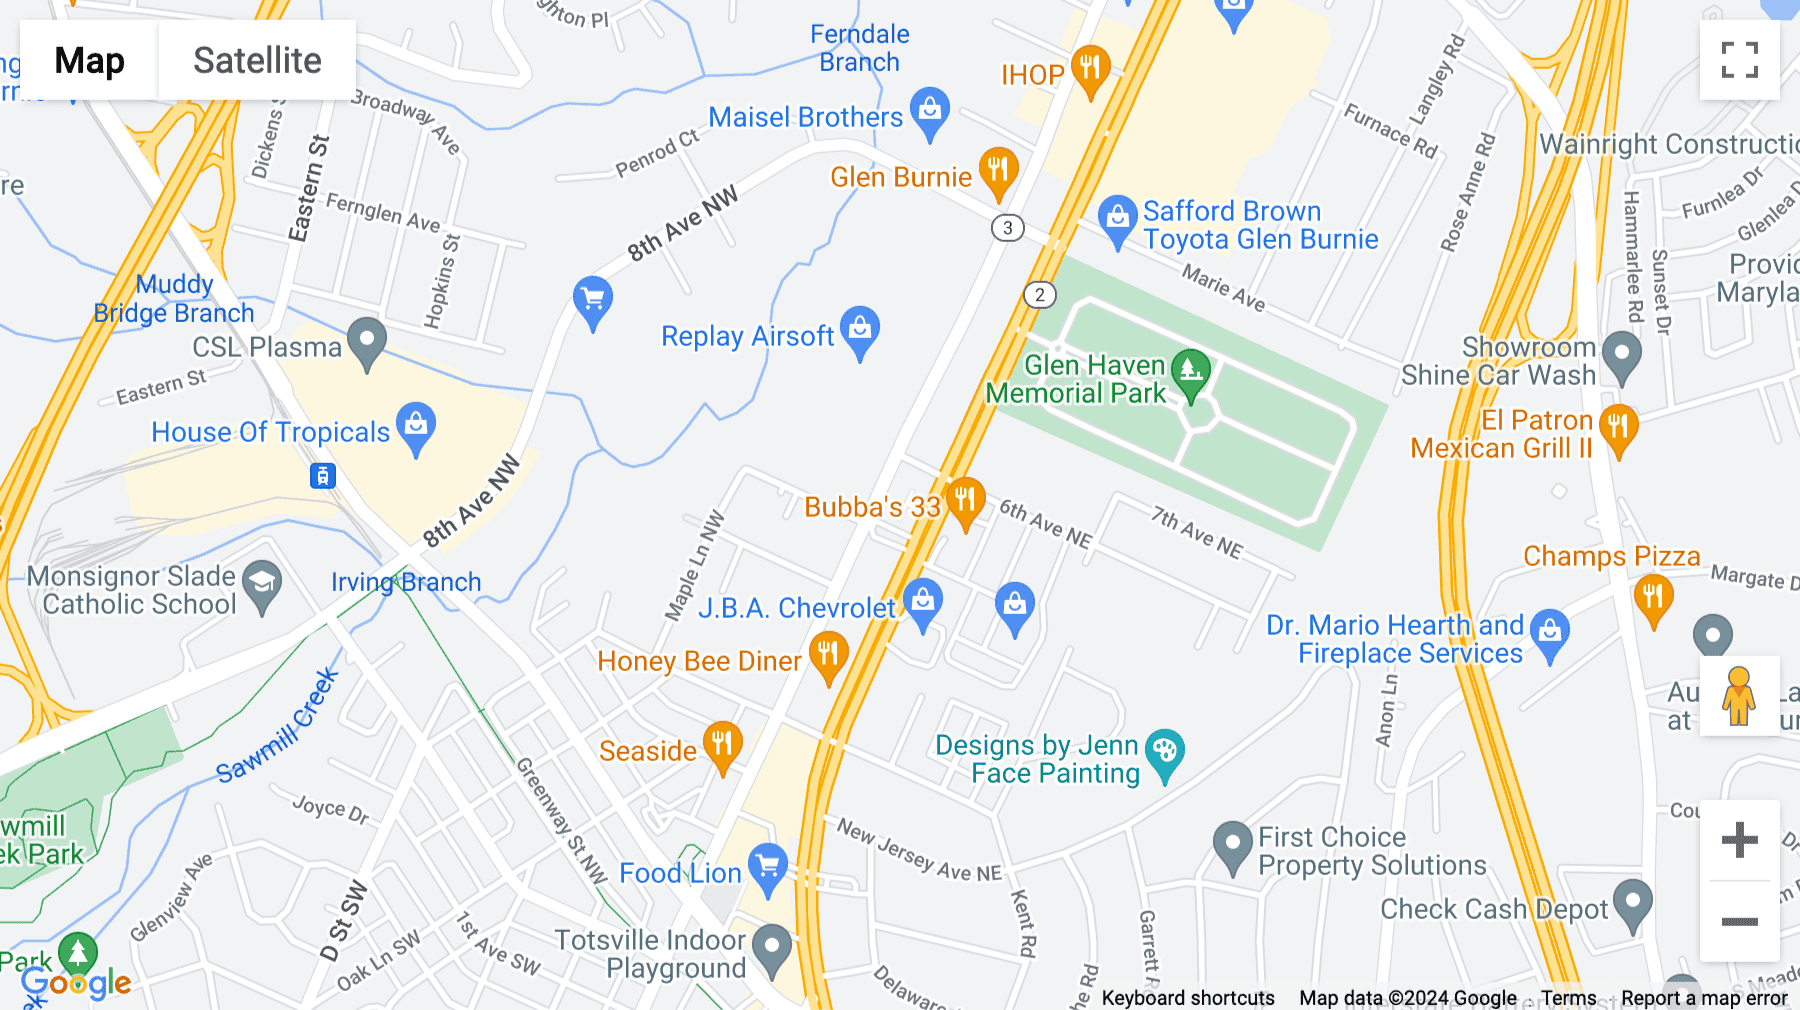 Click for interative map of 7310 Ritchie Highway, Suite 200, Glen Burnie